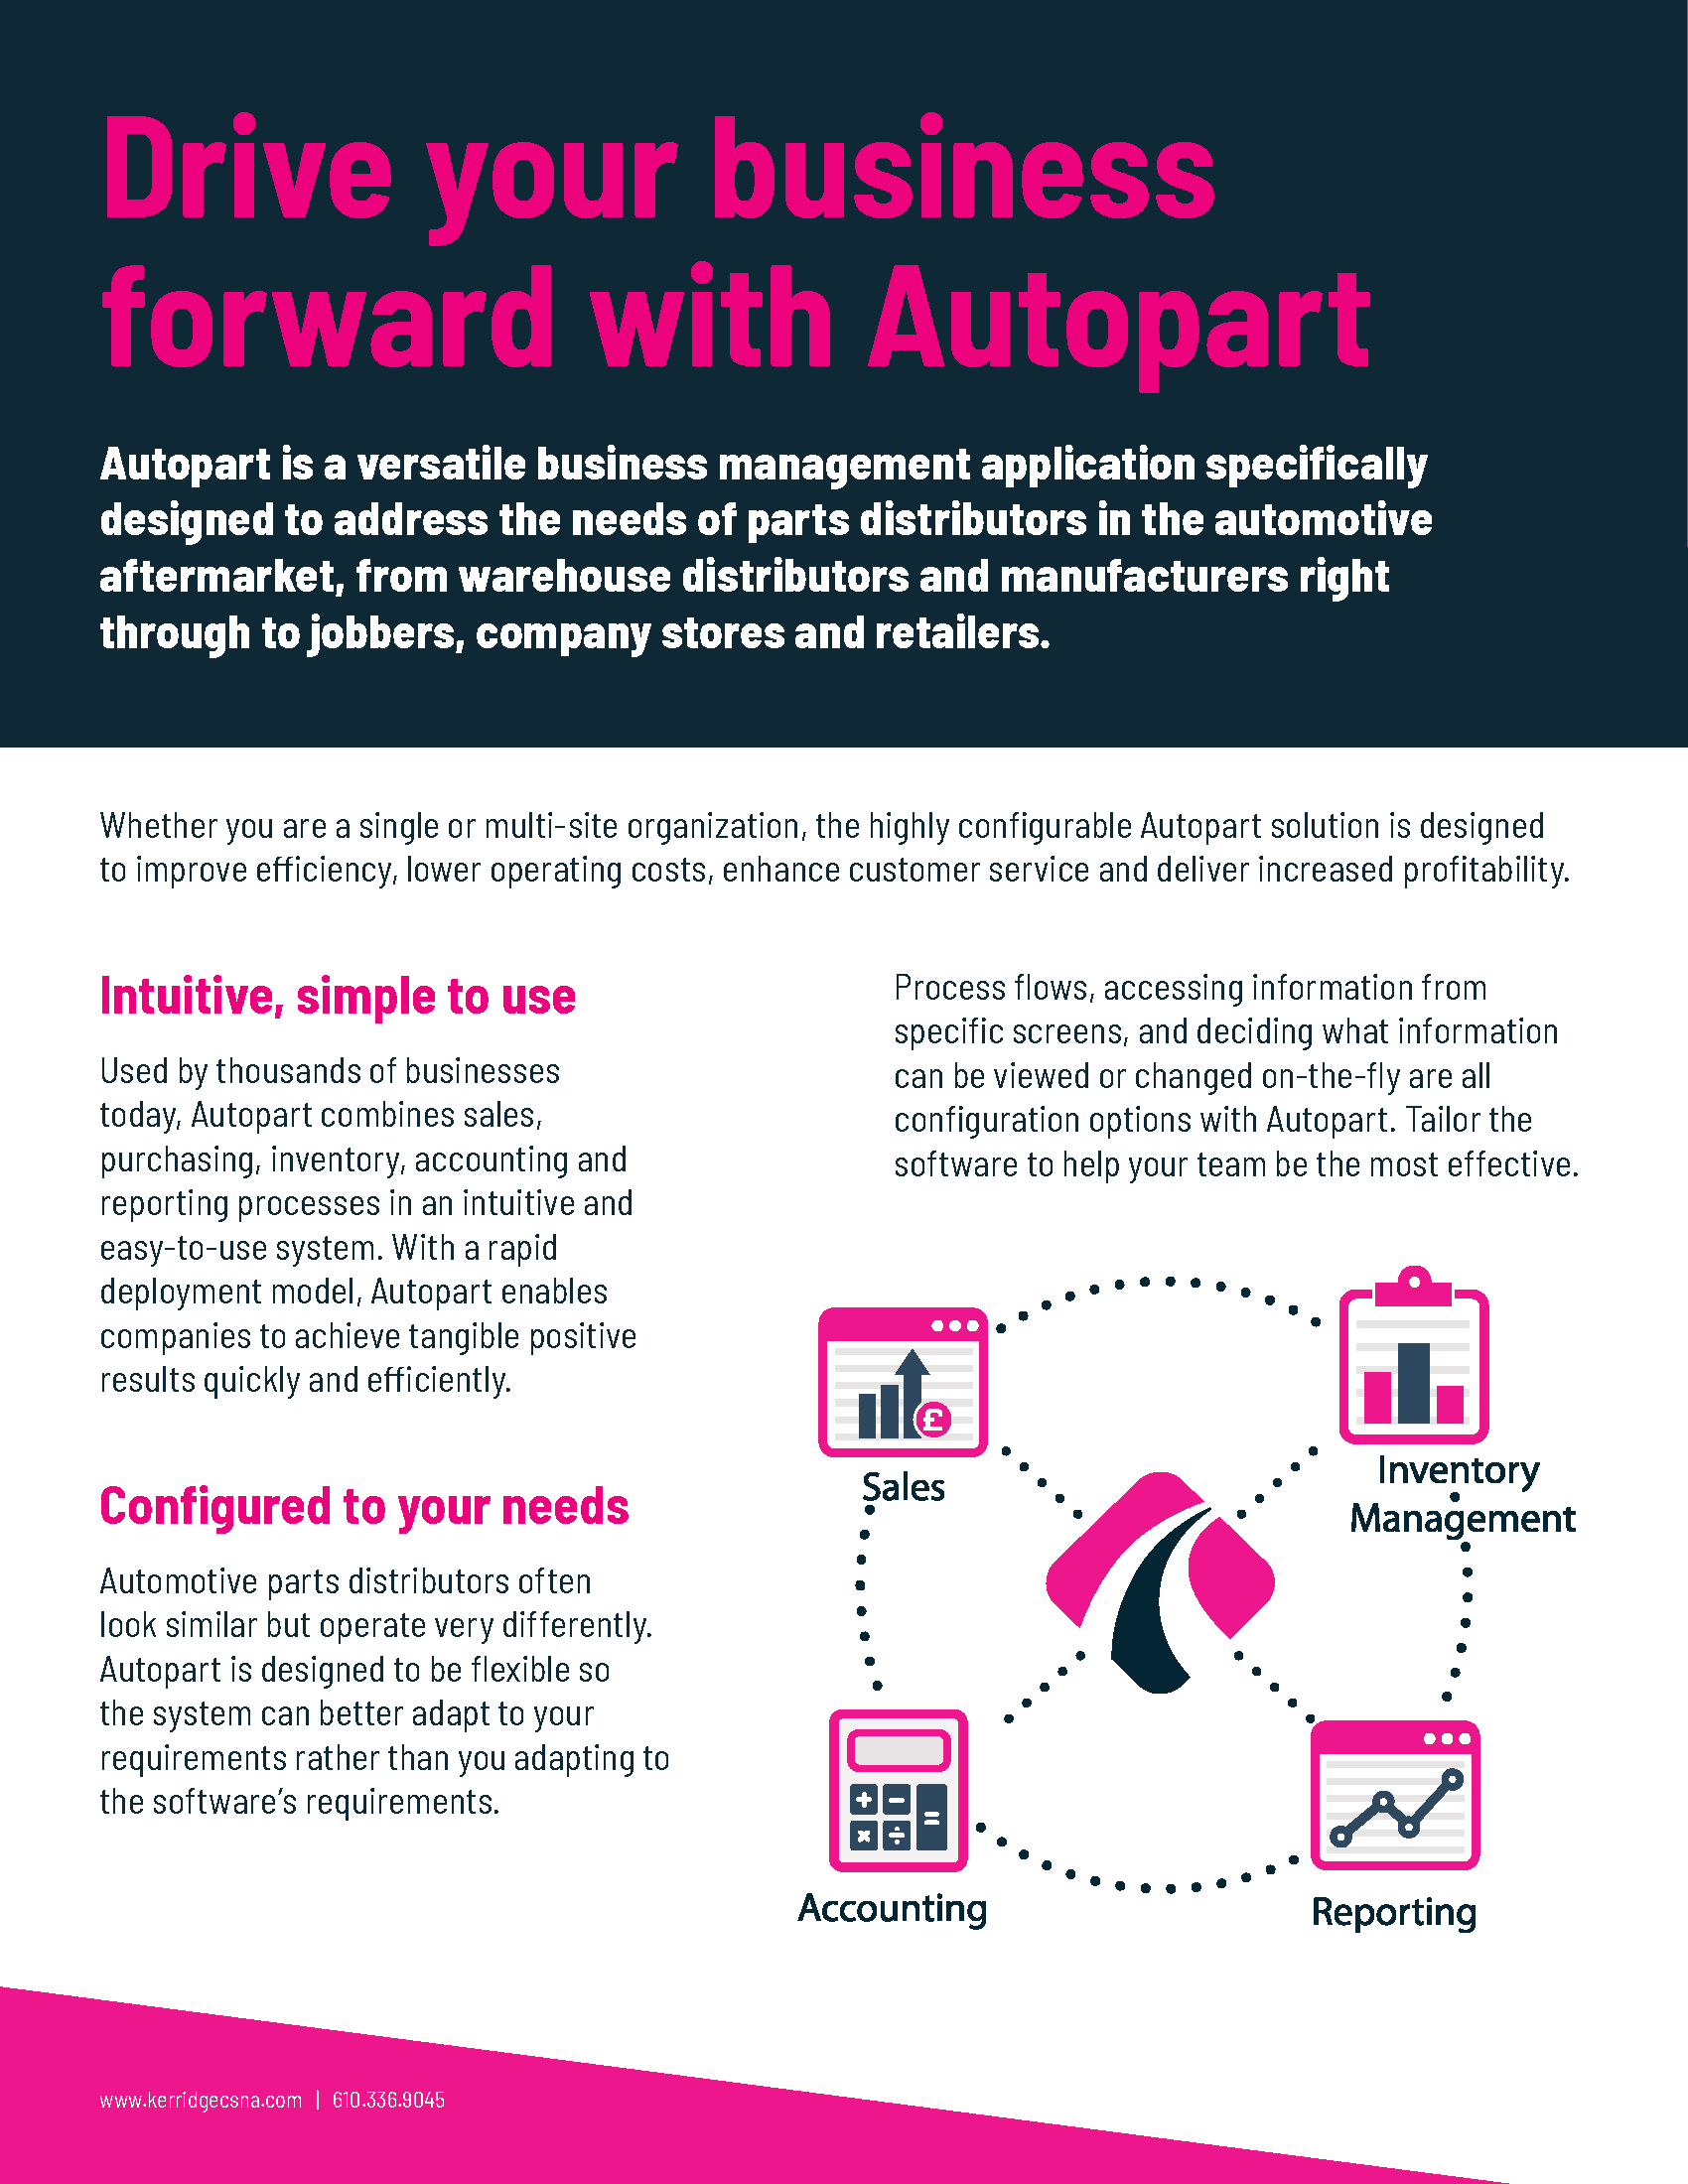 Drive Your Business with Autopart